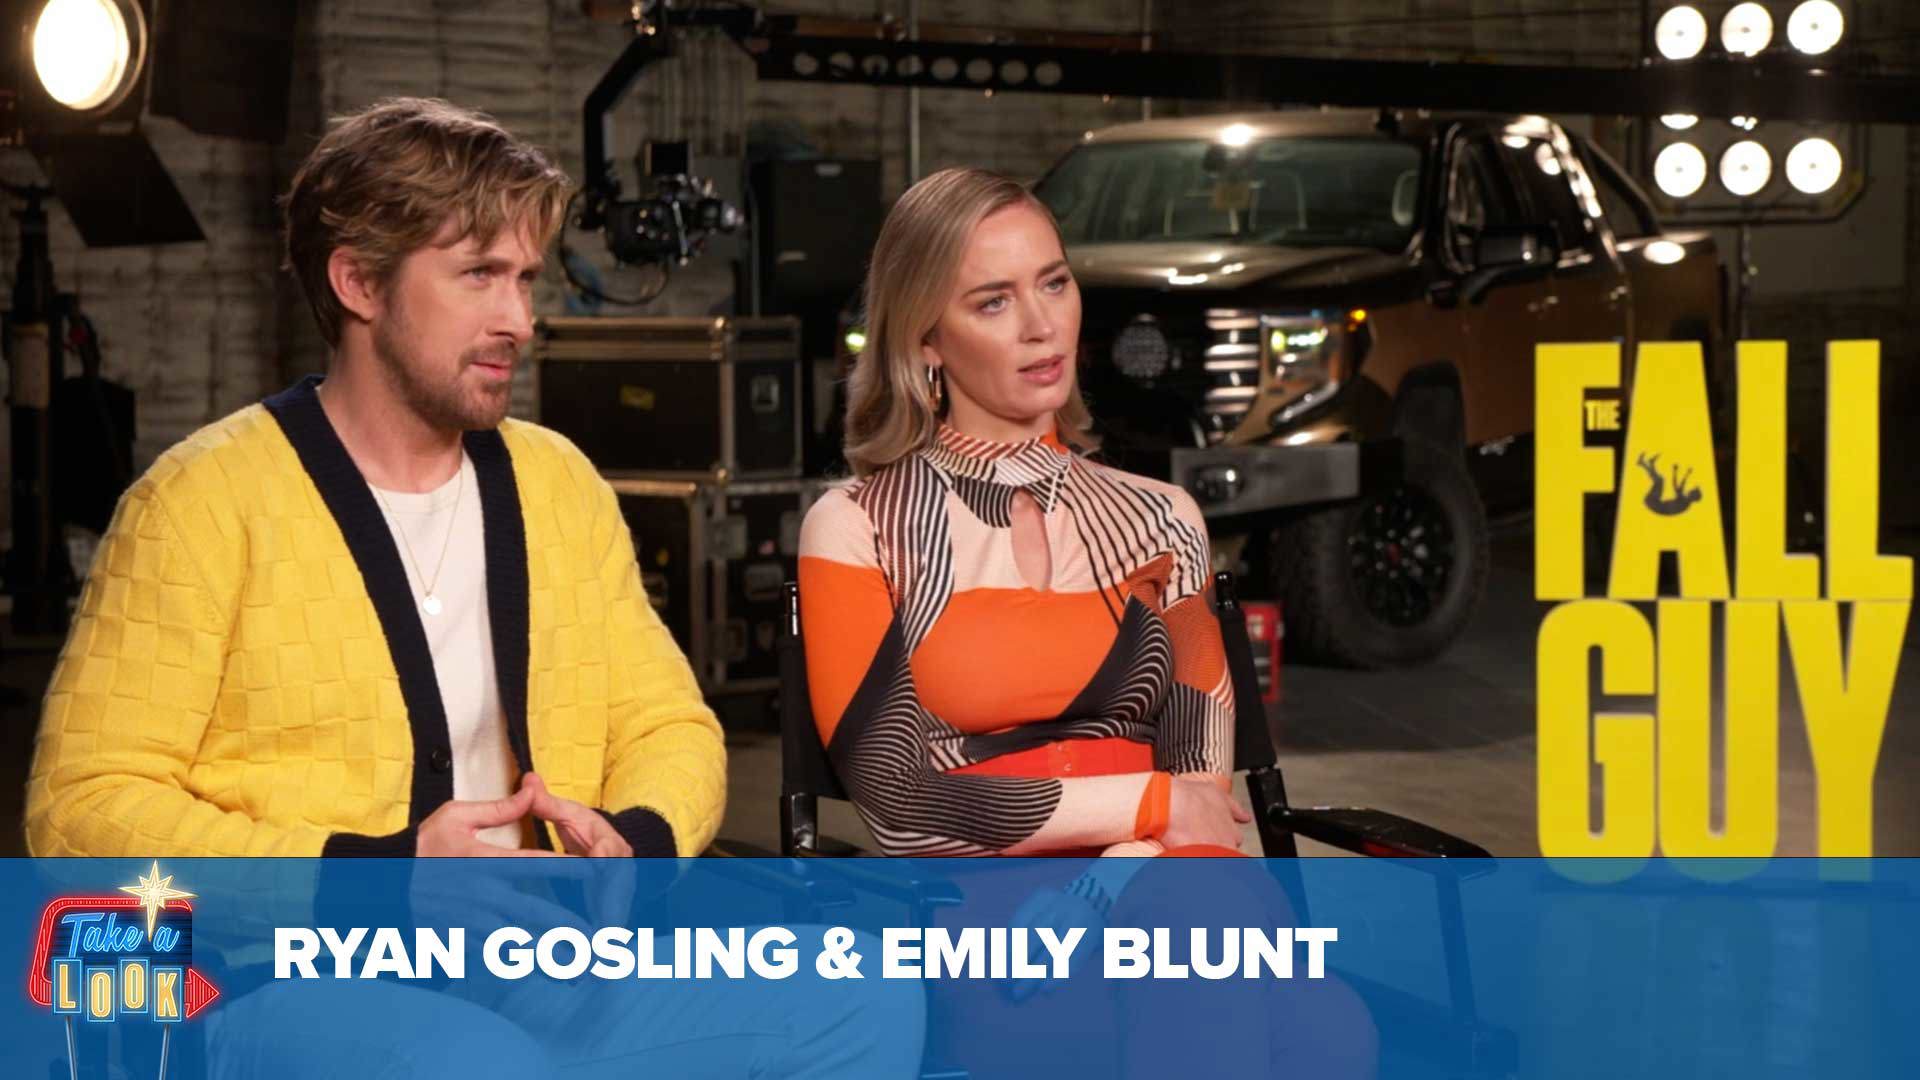 Ryan Gosling & Emily Blunt talk about the joys of making "The Fall Guy"